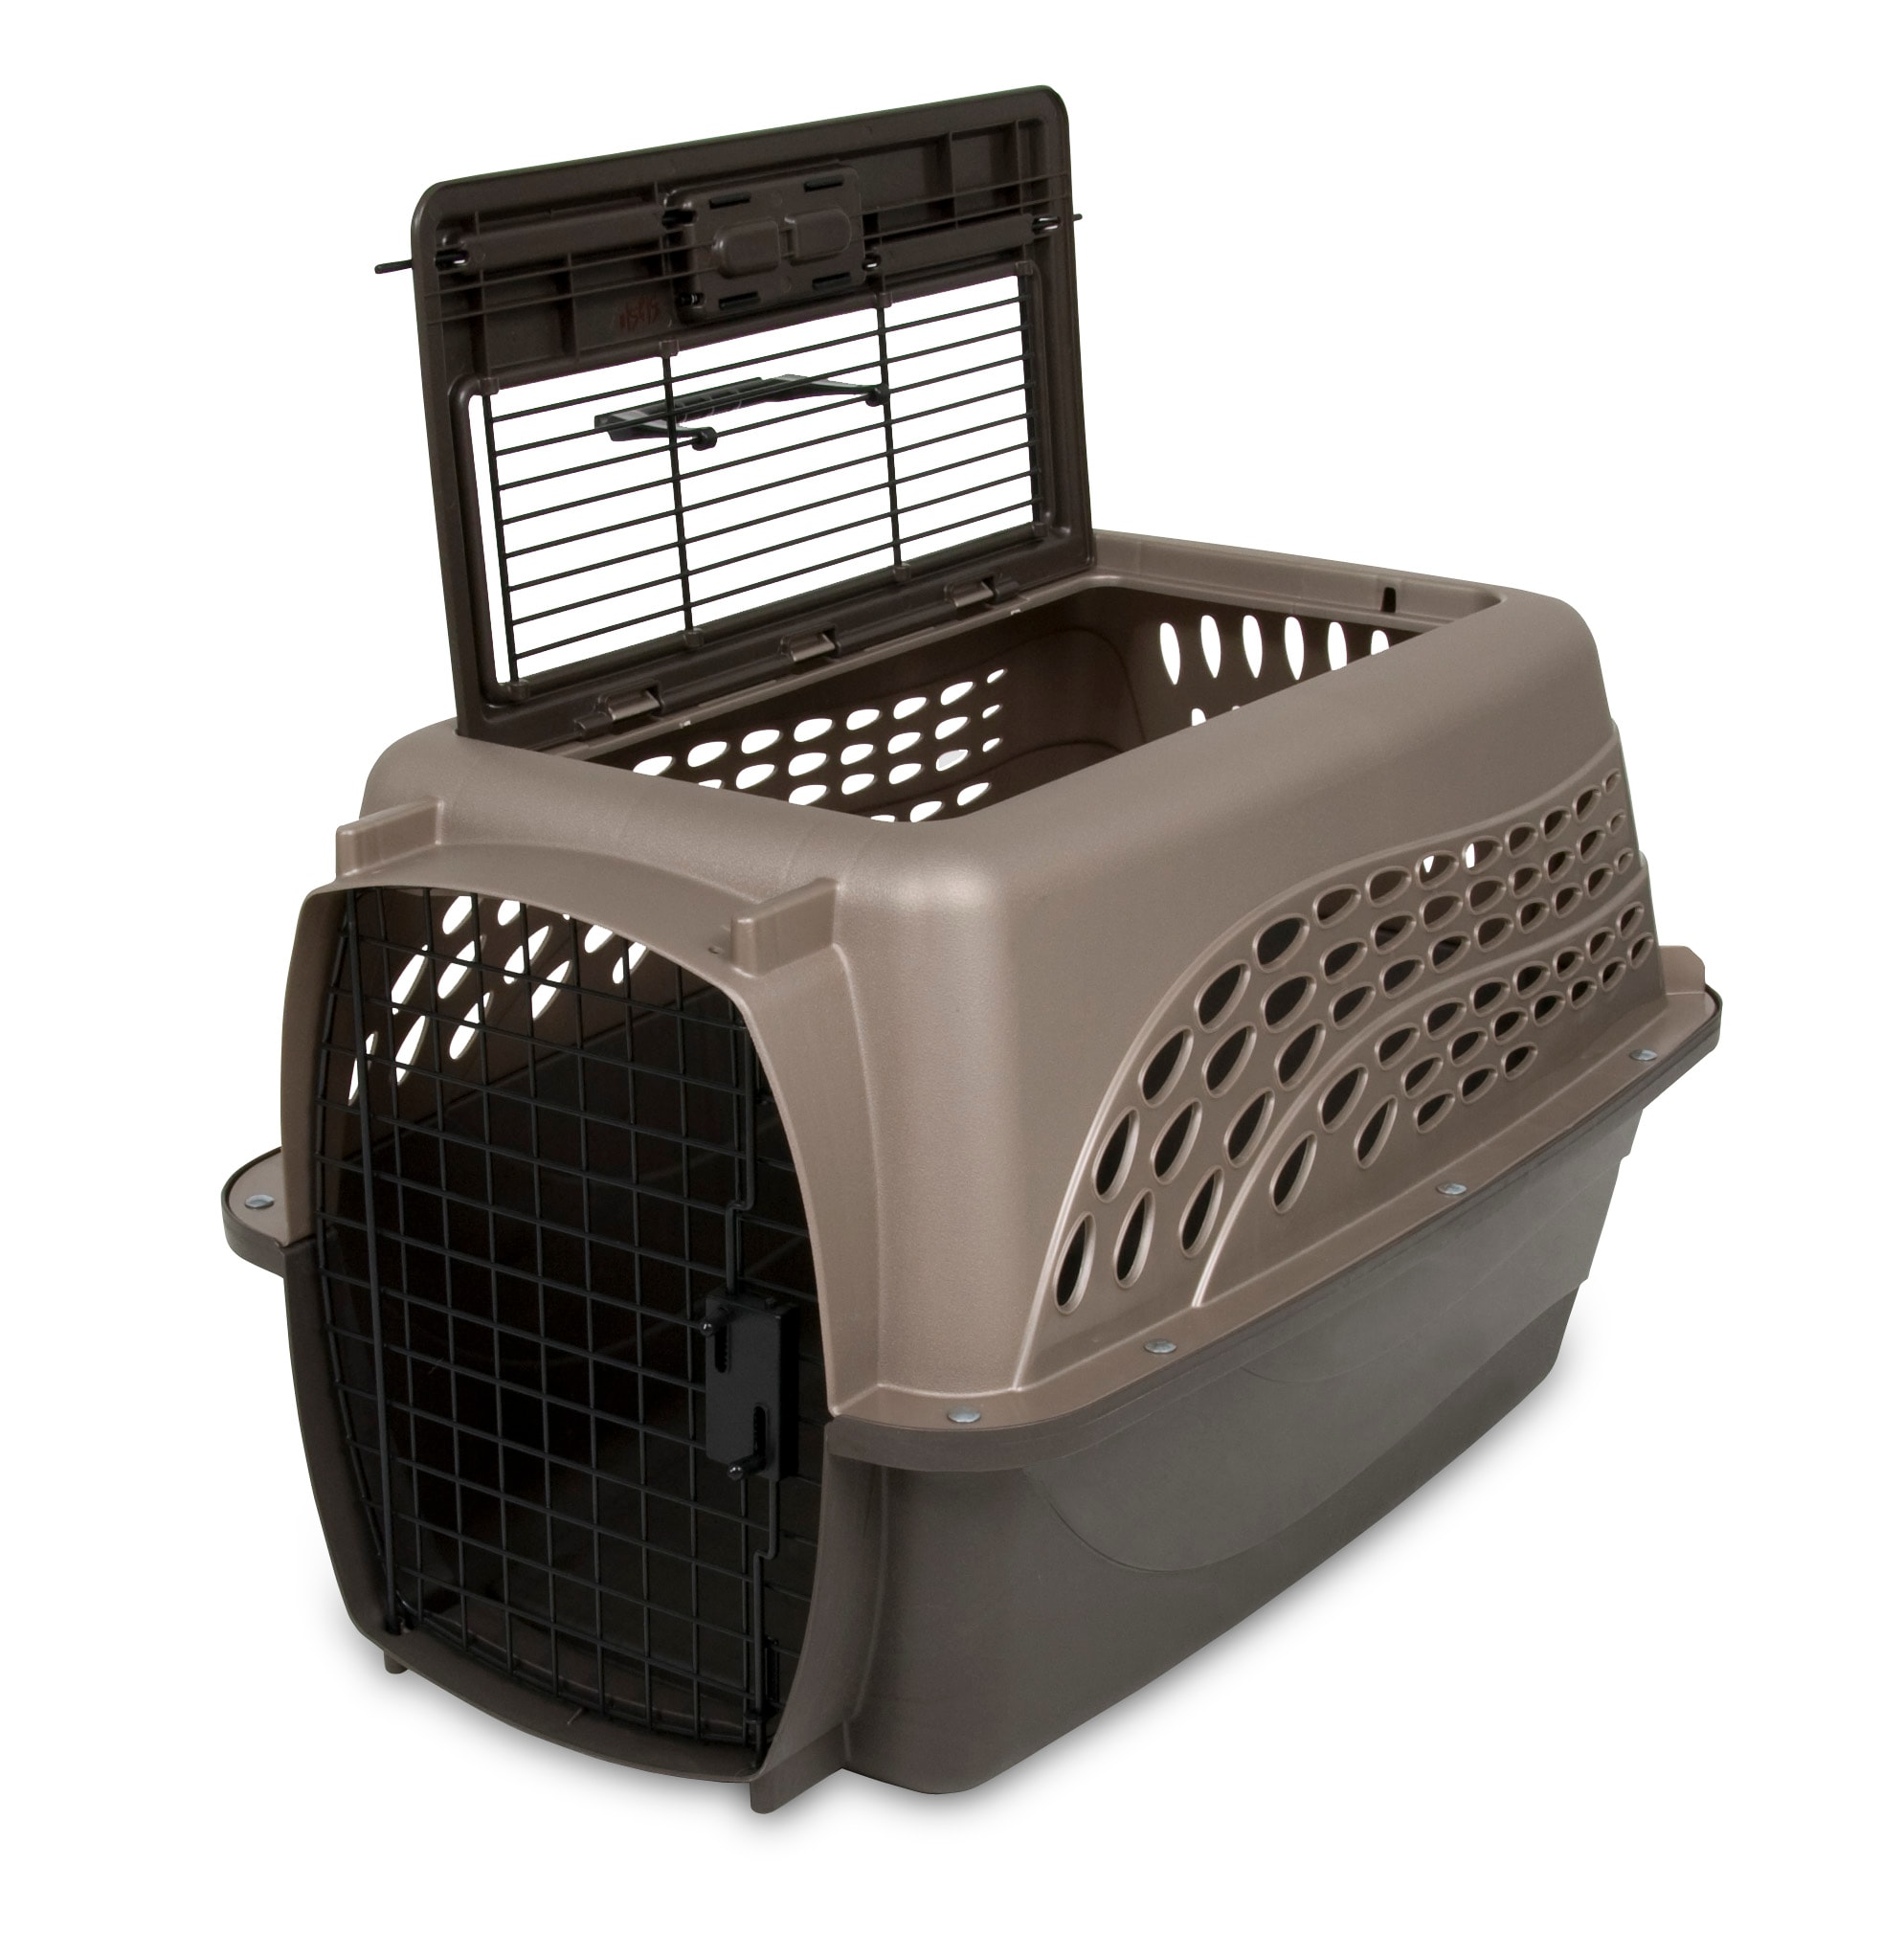 The 7 Best Dog Crates and Kennels 2018